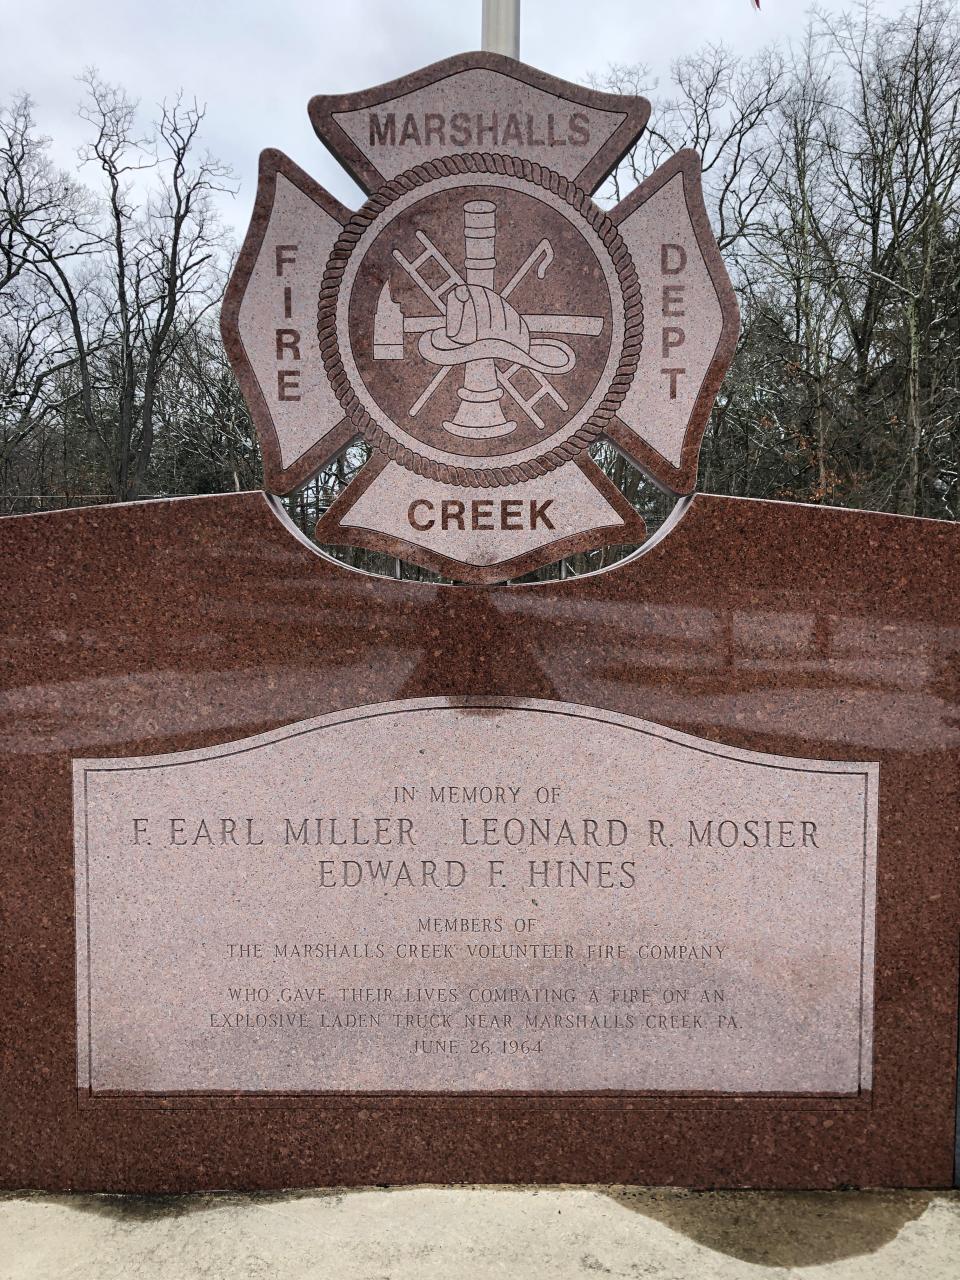 The Marshalls Creek Fire Company has a memorial for the three firefighters killed in the 1964 explosion on Route 209.